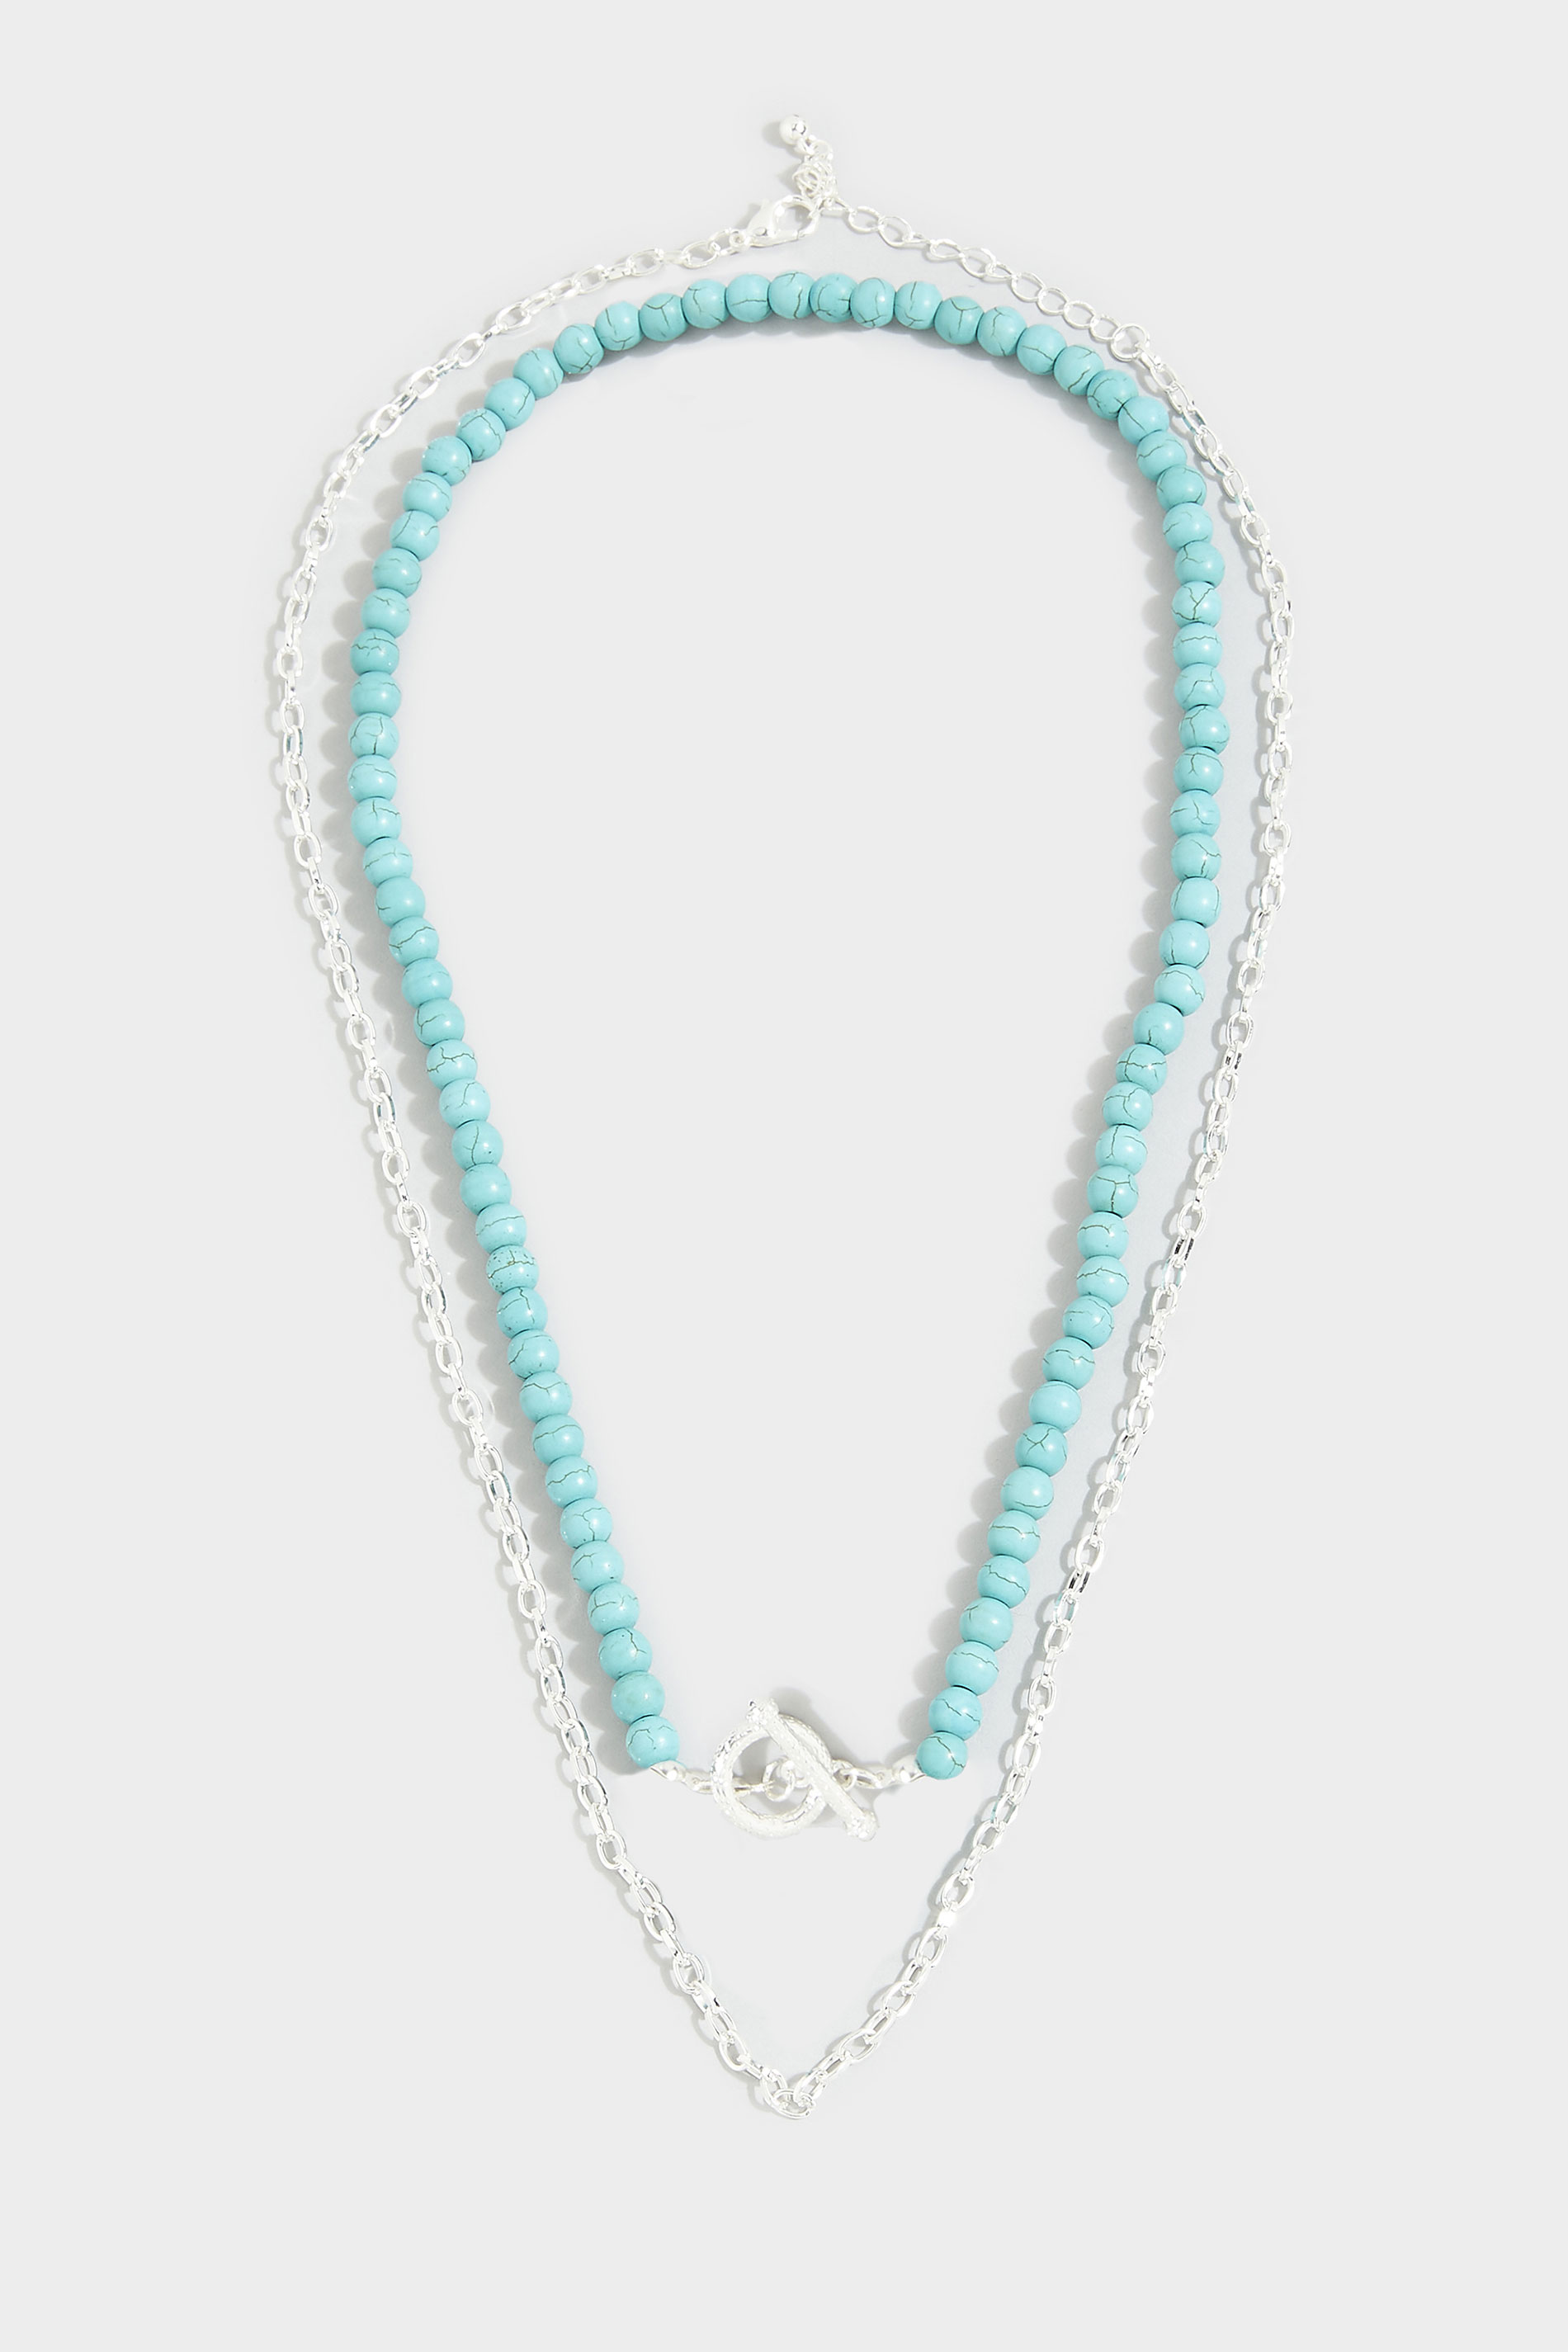 Silver & Blue Stone Layered Necklace_1.jpg